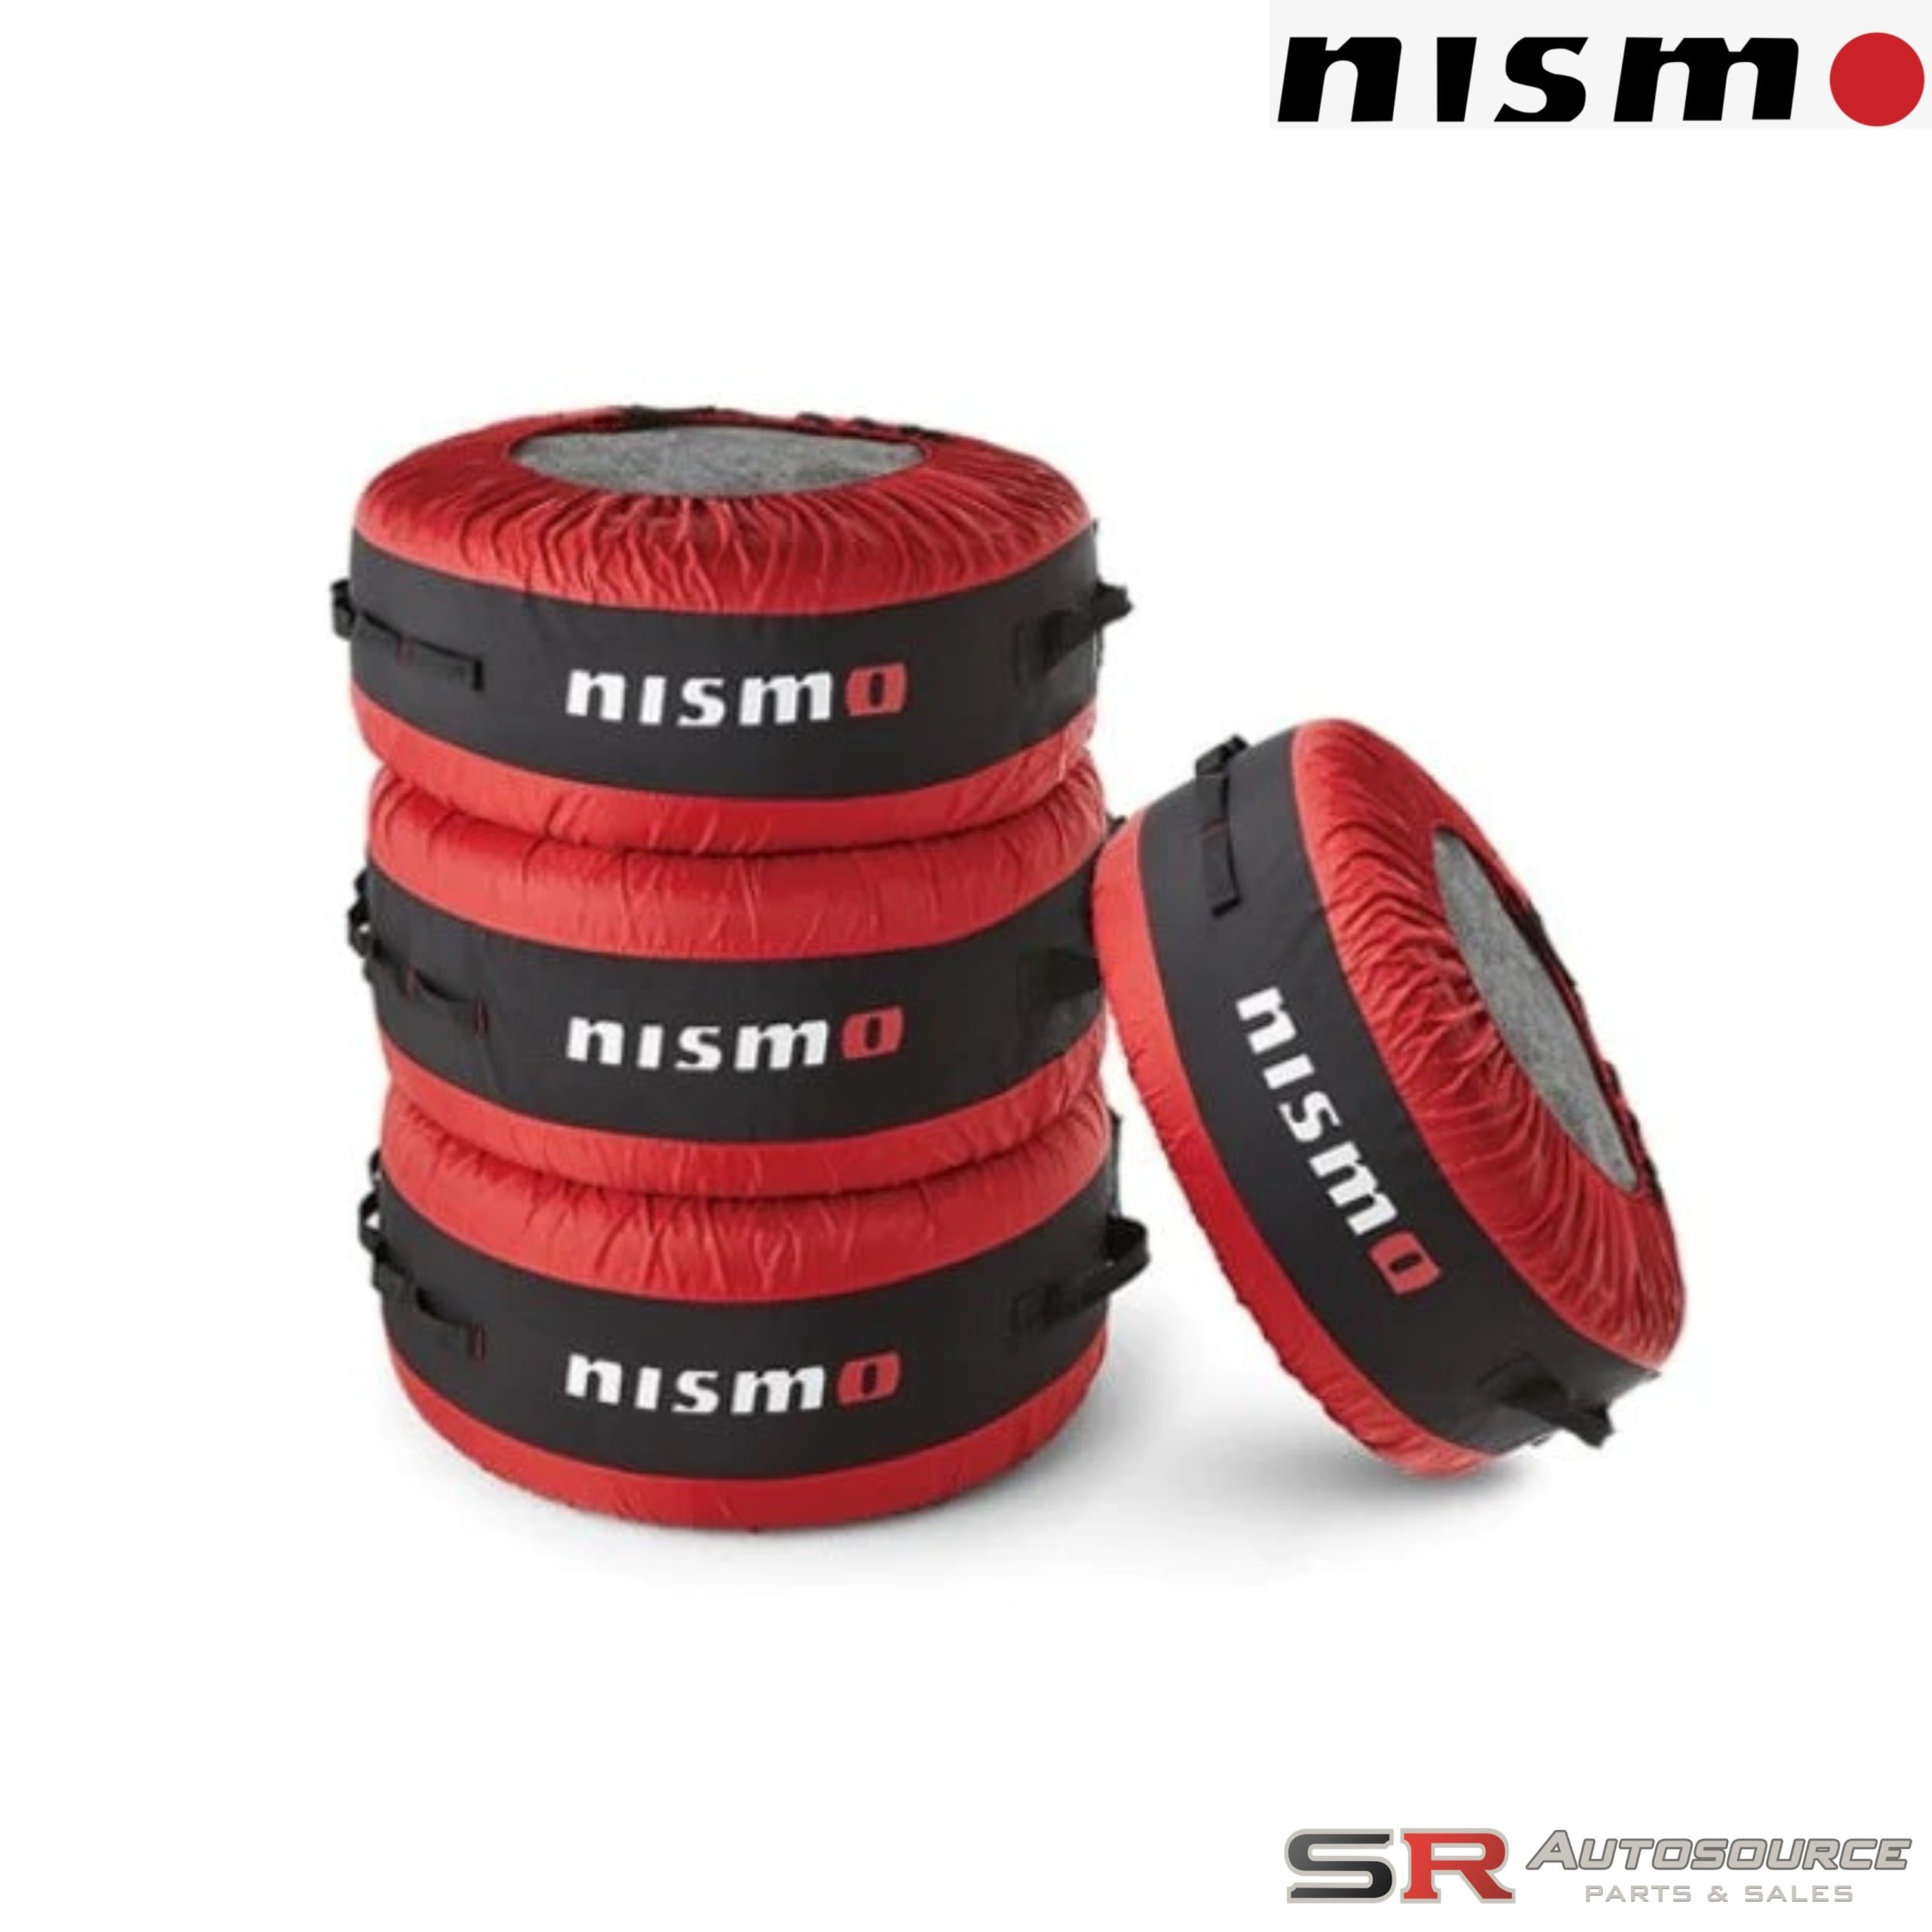 Nismo Tyre Cover 4 Piece Set – Storage Bags (Tyre Totes)